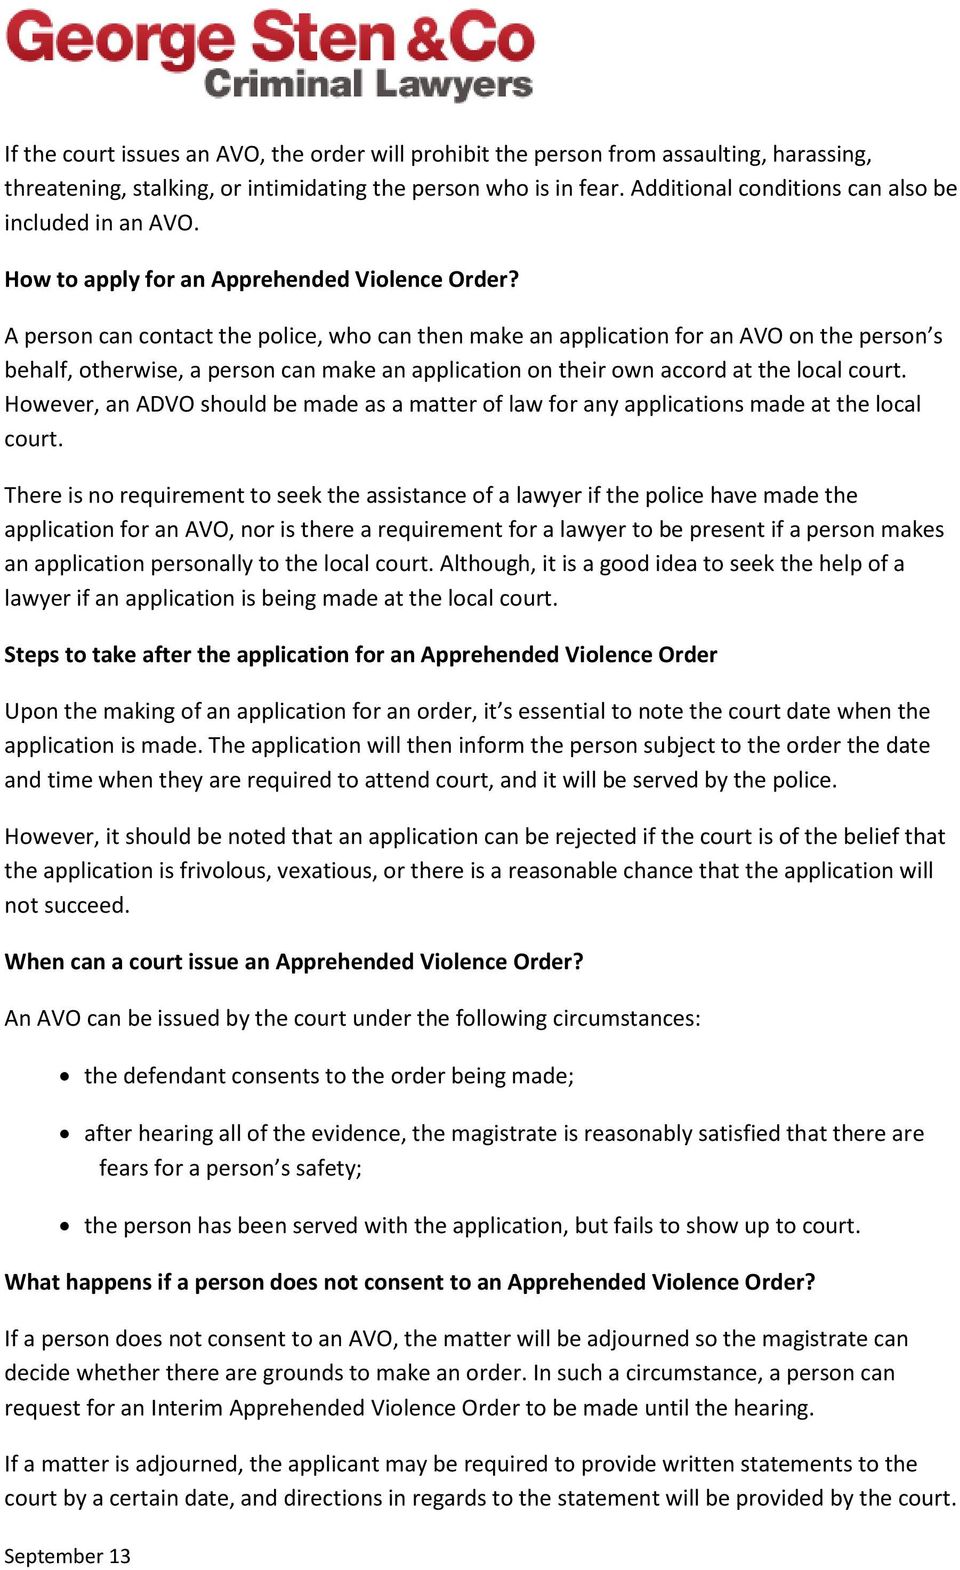 A person can contact the police, who can then make an application for an AVO on the person s behalf, otherwise, a person can make an application on their own accord at the local court.